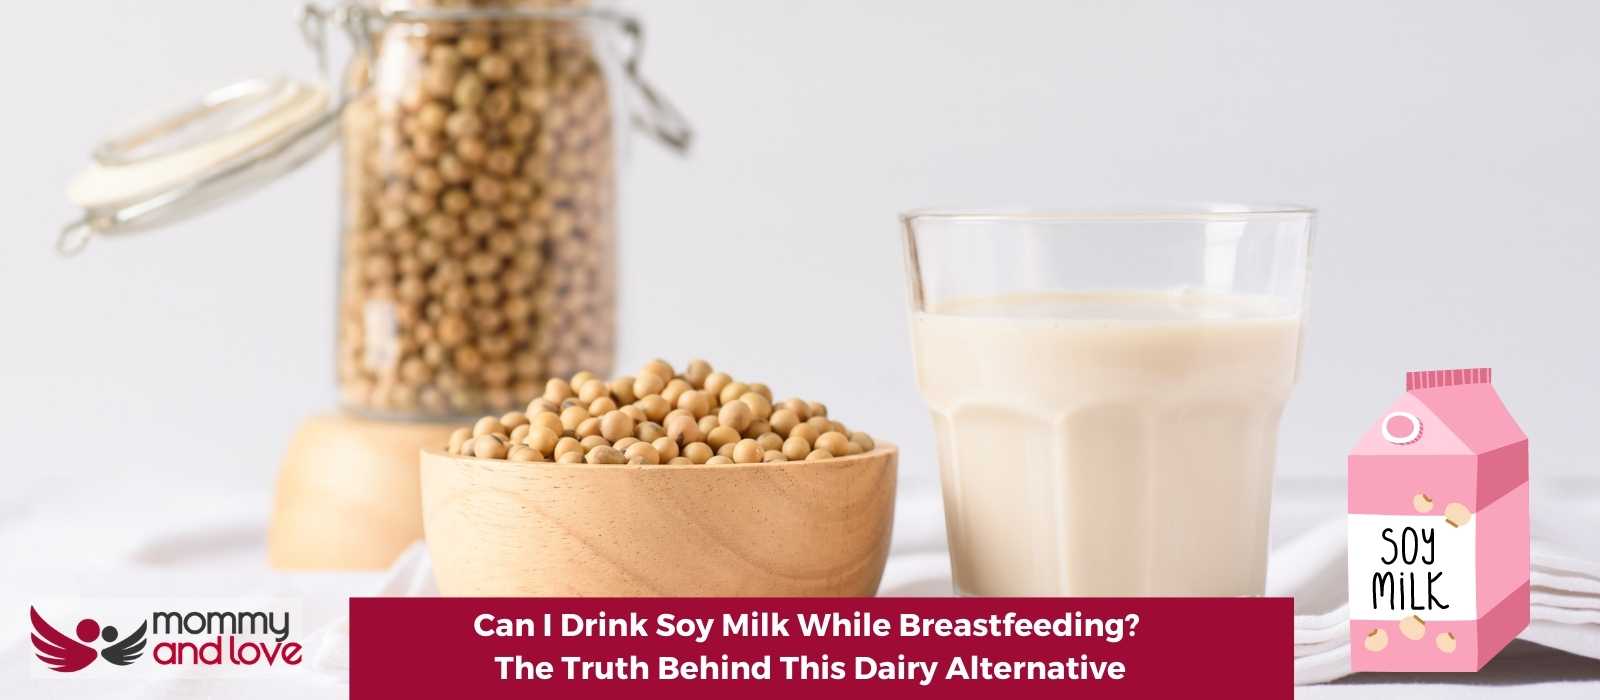 Can I Drink Soy Milk While Breastfeeding - The Truth Behind This Dairy Alternative